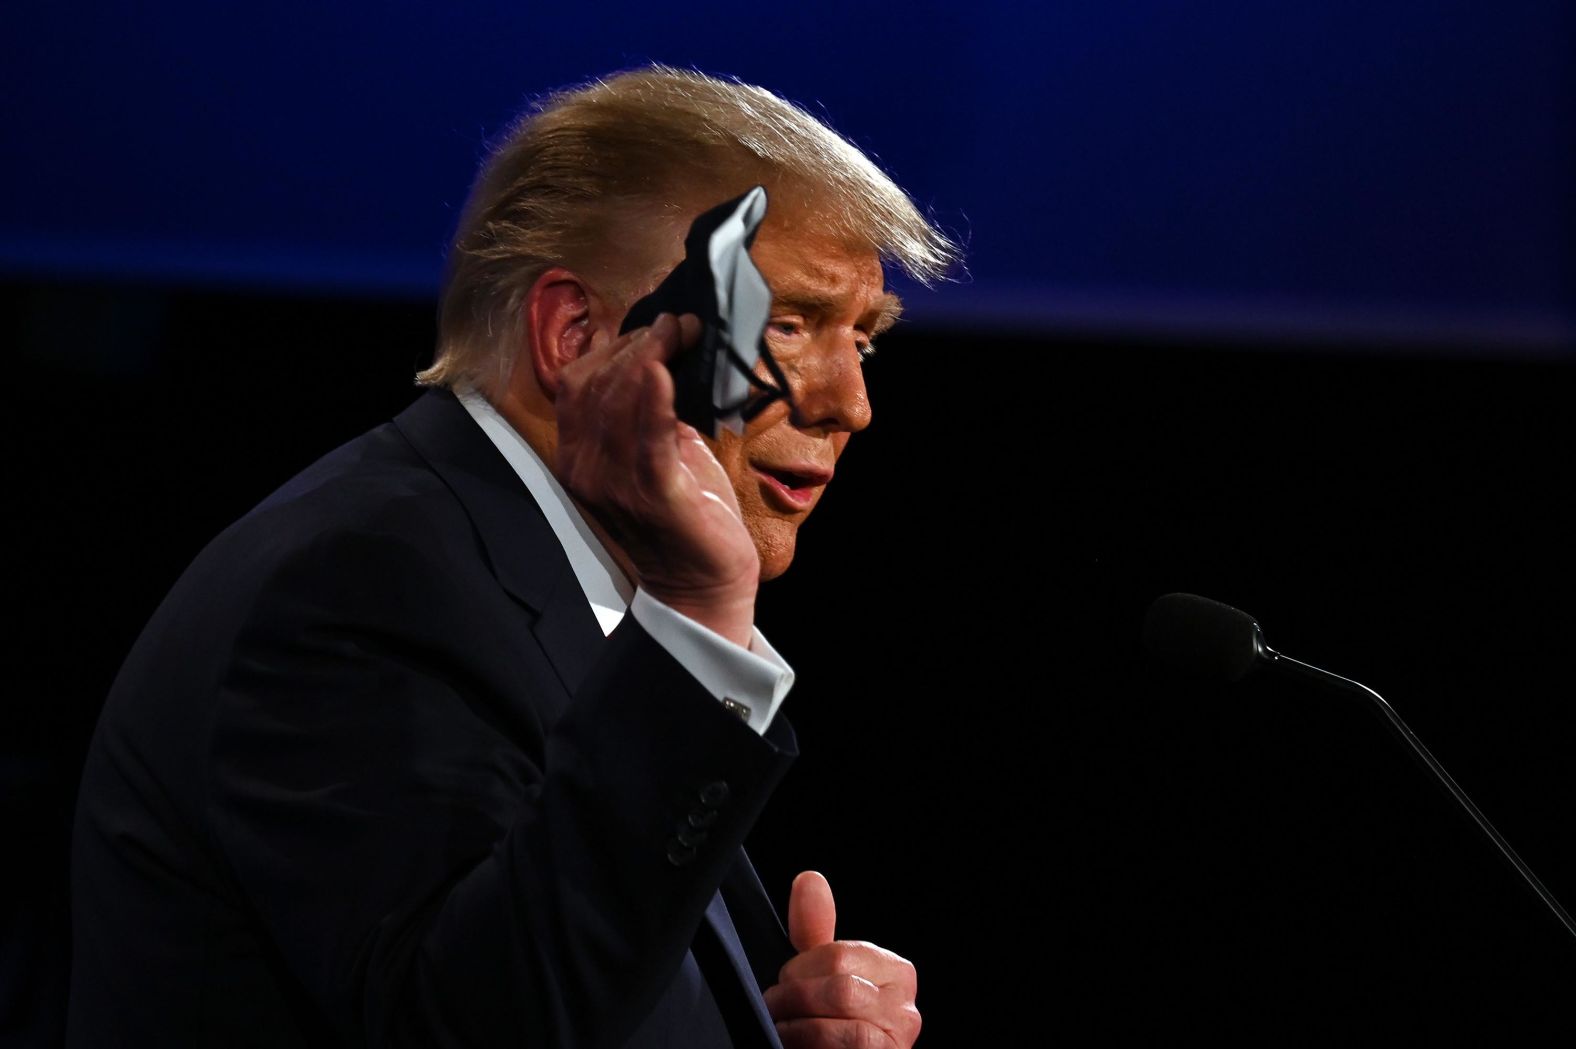 Trump holds a face mask as he speaks during the debate. "I don't wear a mask like (Biden), every time you see him, he's got a mask," <a href="https://www.cnn.com/politics/live-news/presidential-debate-coverage-fact-check-09-29-20/h_1e0c9b875c0fa789a2ffc63165f27d00" target="_blank">Trump said.</a> "He could be speaking 200 feet away from it, and he shows up with the biggest mask I've ever seen."